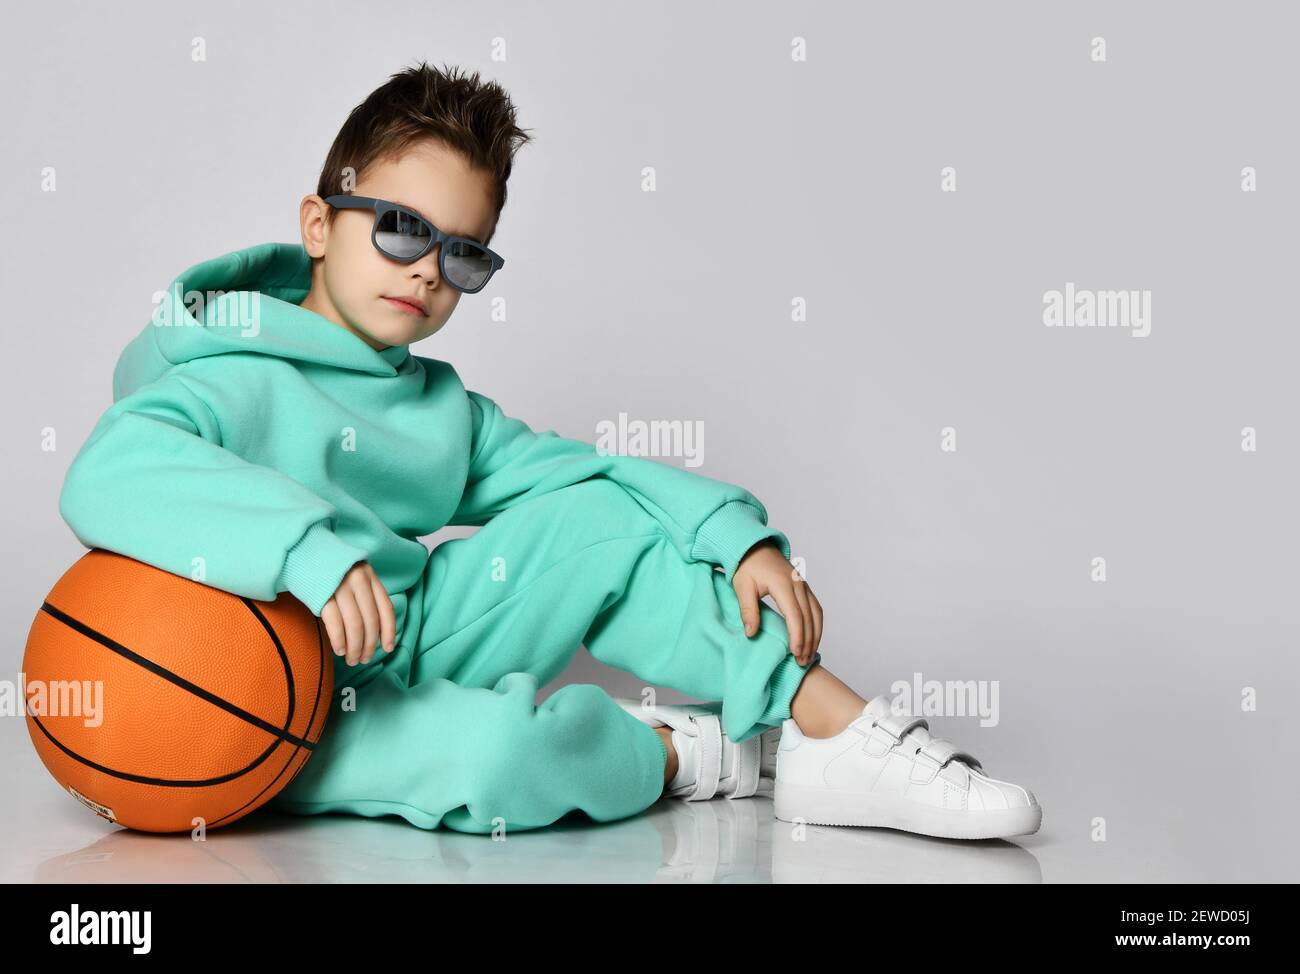 Cool guy schoolboy in modern green, mint color sportswear hoodie, pants and white sneakers sits on floor with basketball Stock Photo